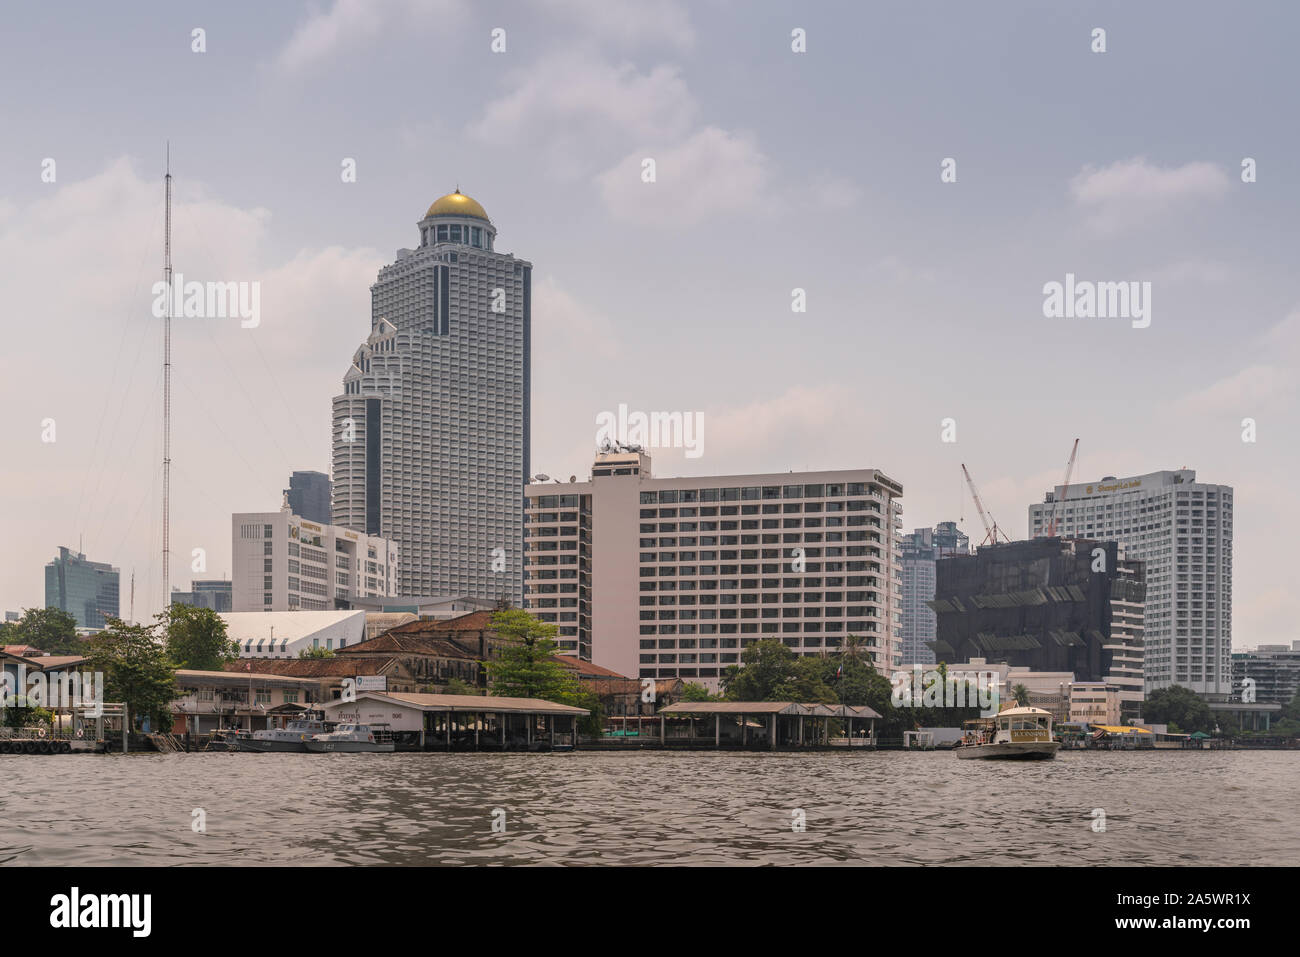 Bangkok city, Thailand - March 17, 2019: Chao Phraya River. Three hotel towers and another one under construction: State Tower with golden dome housin Stock Photo